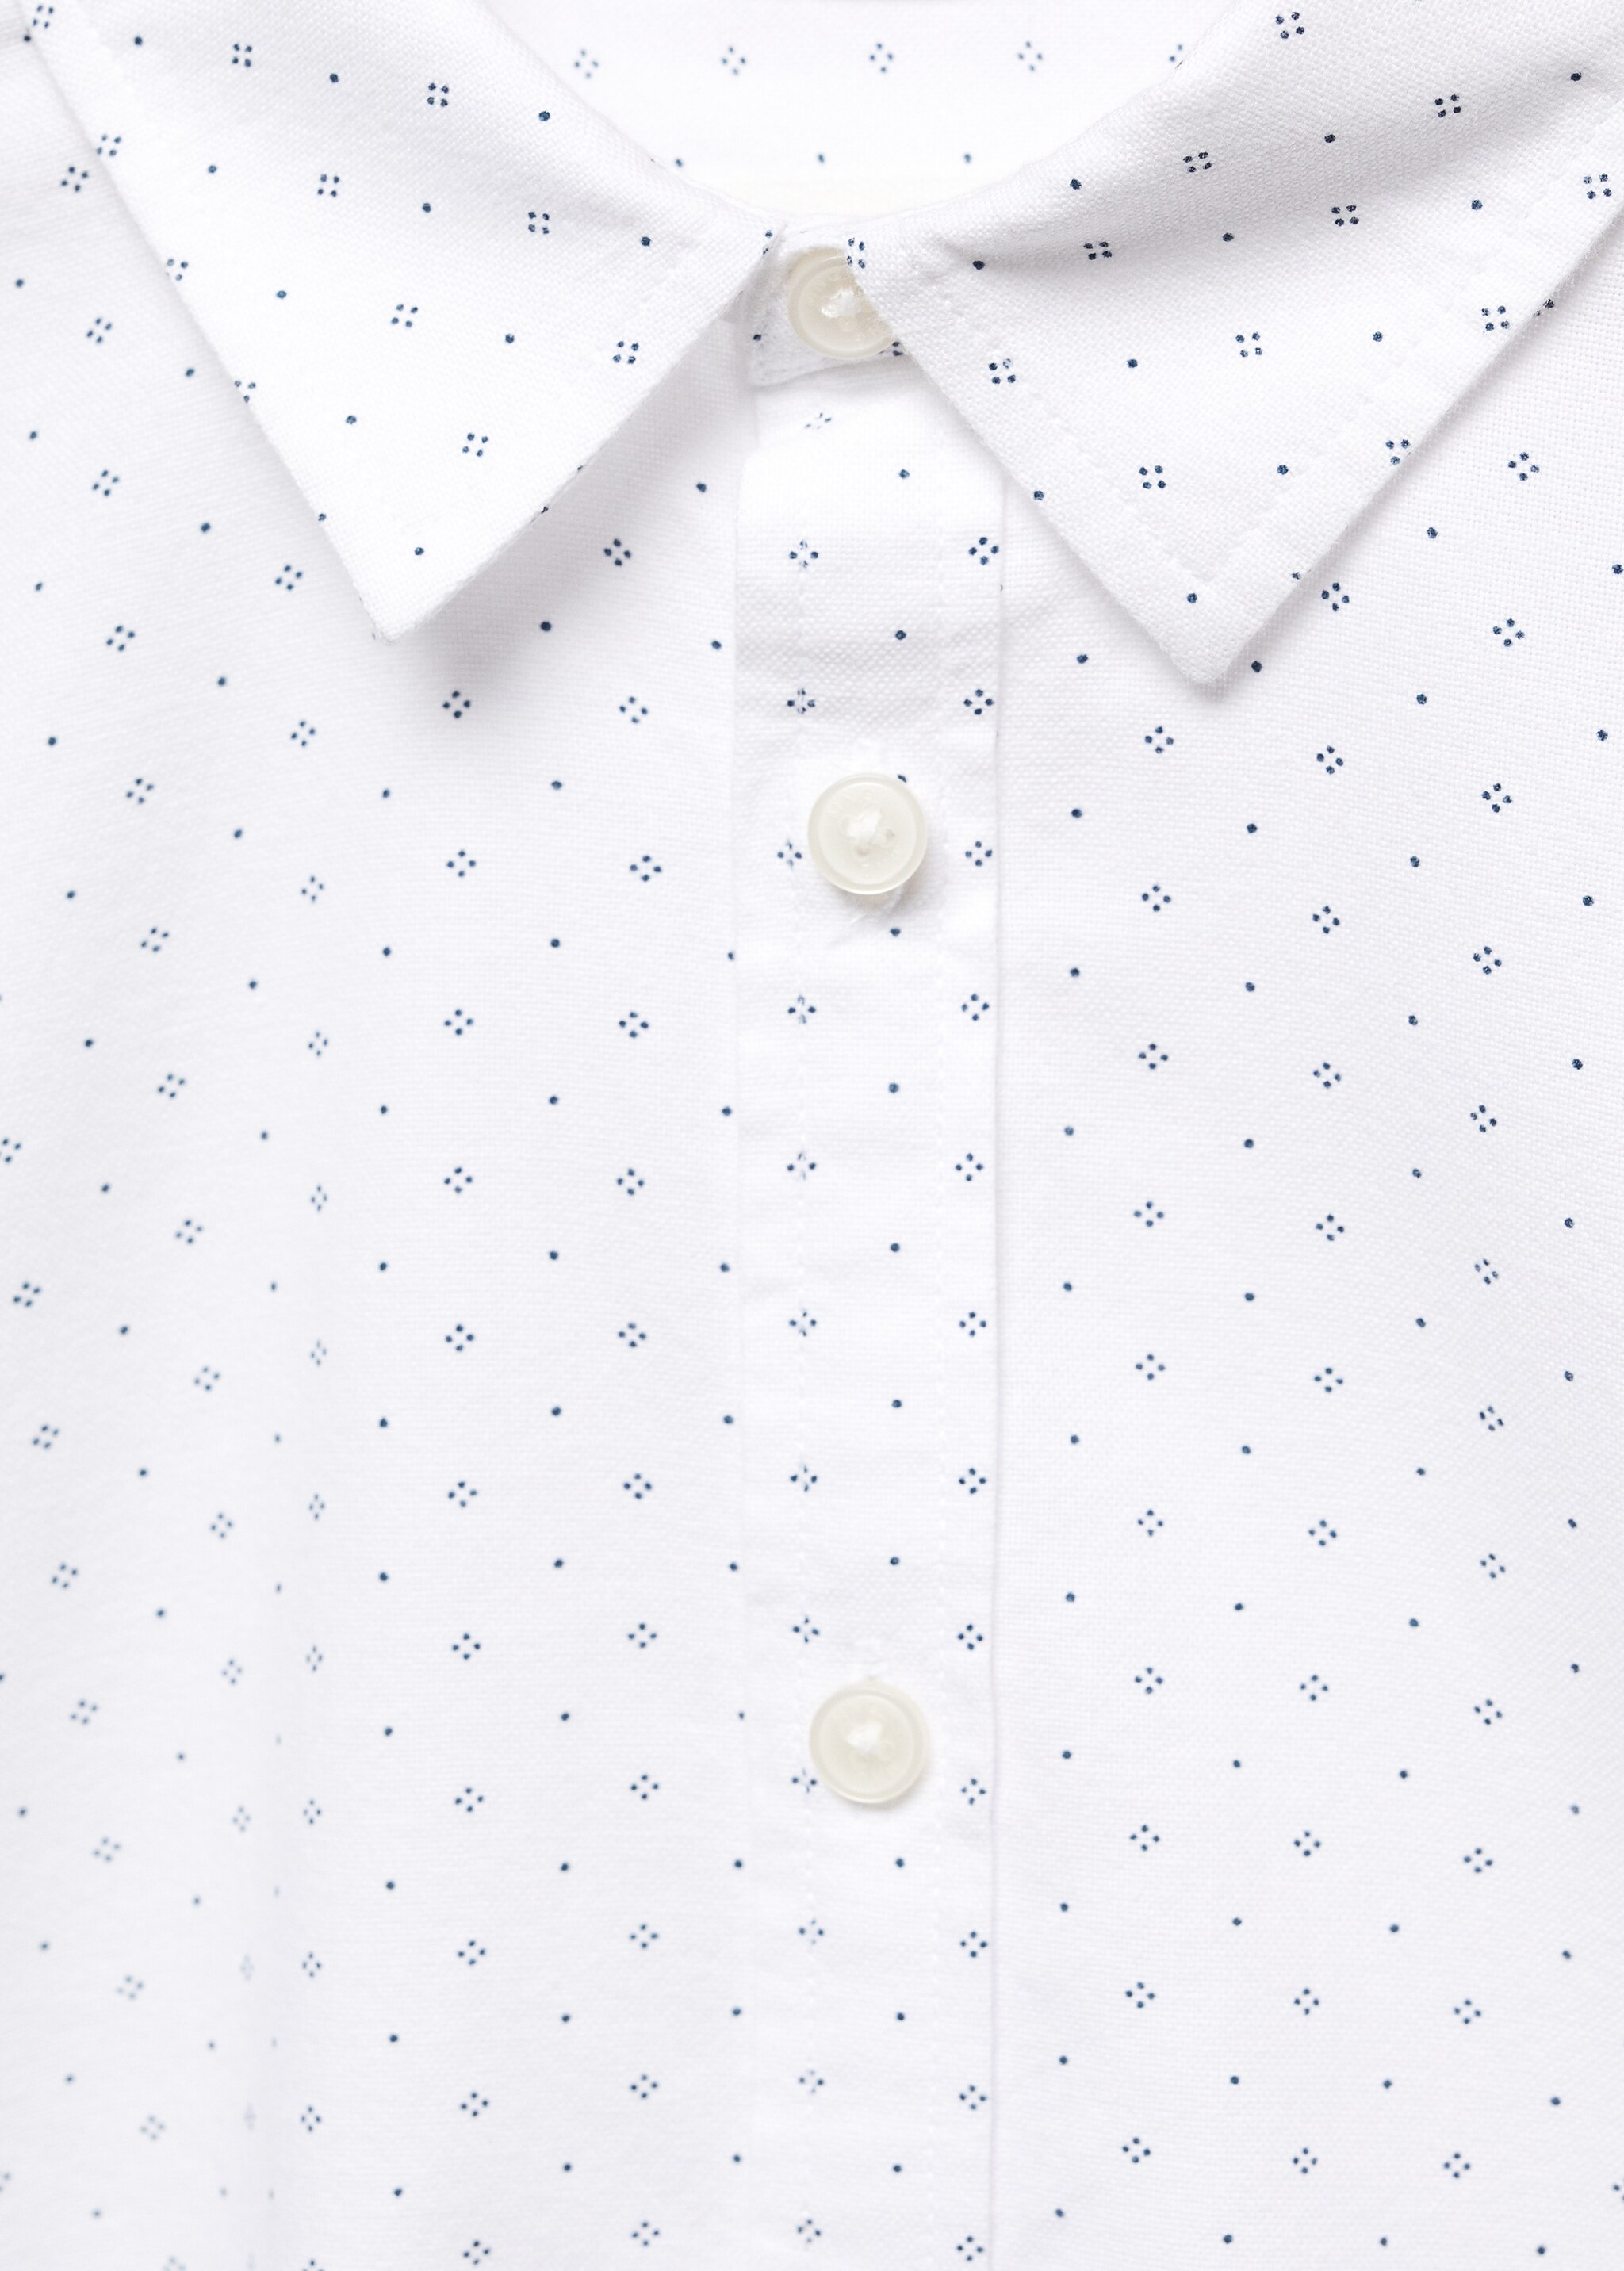 Printed Oxford shirt - Details of the article 8